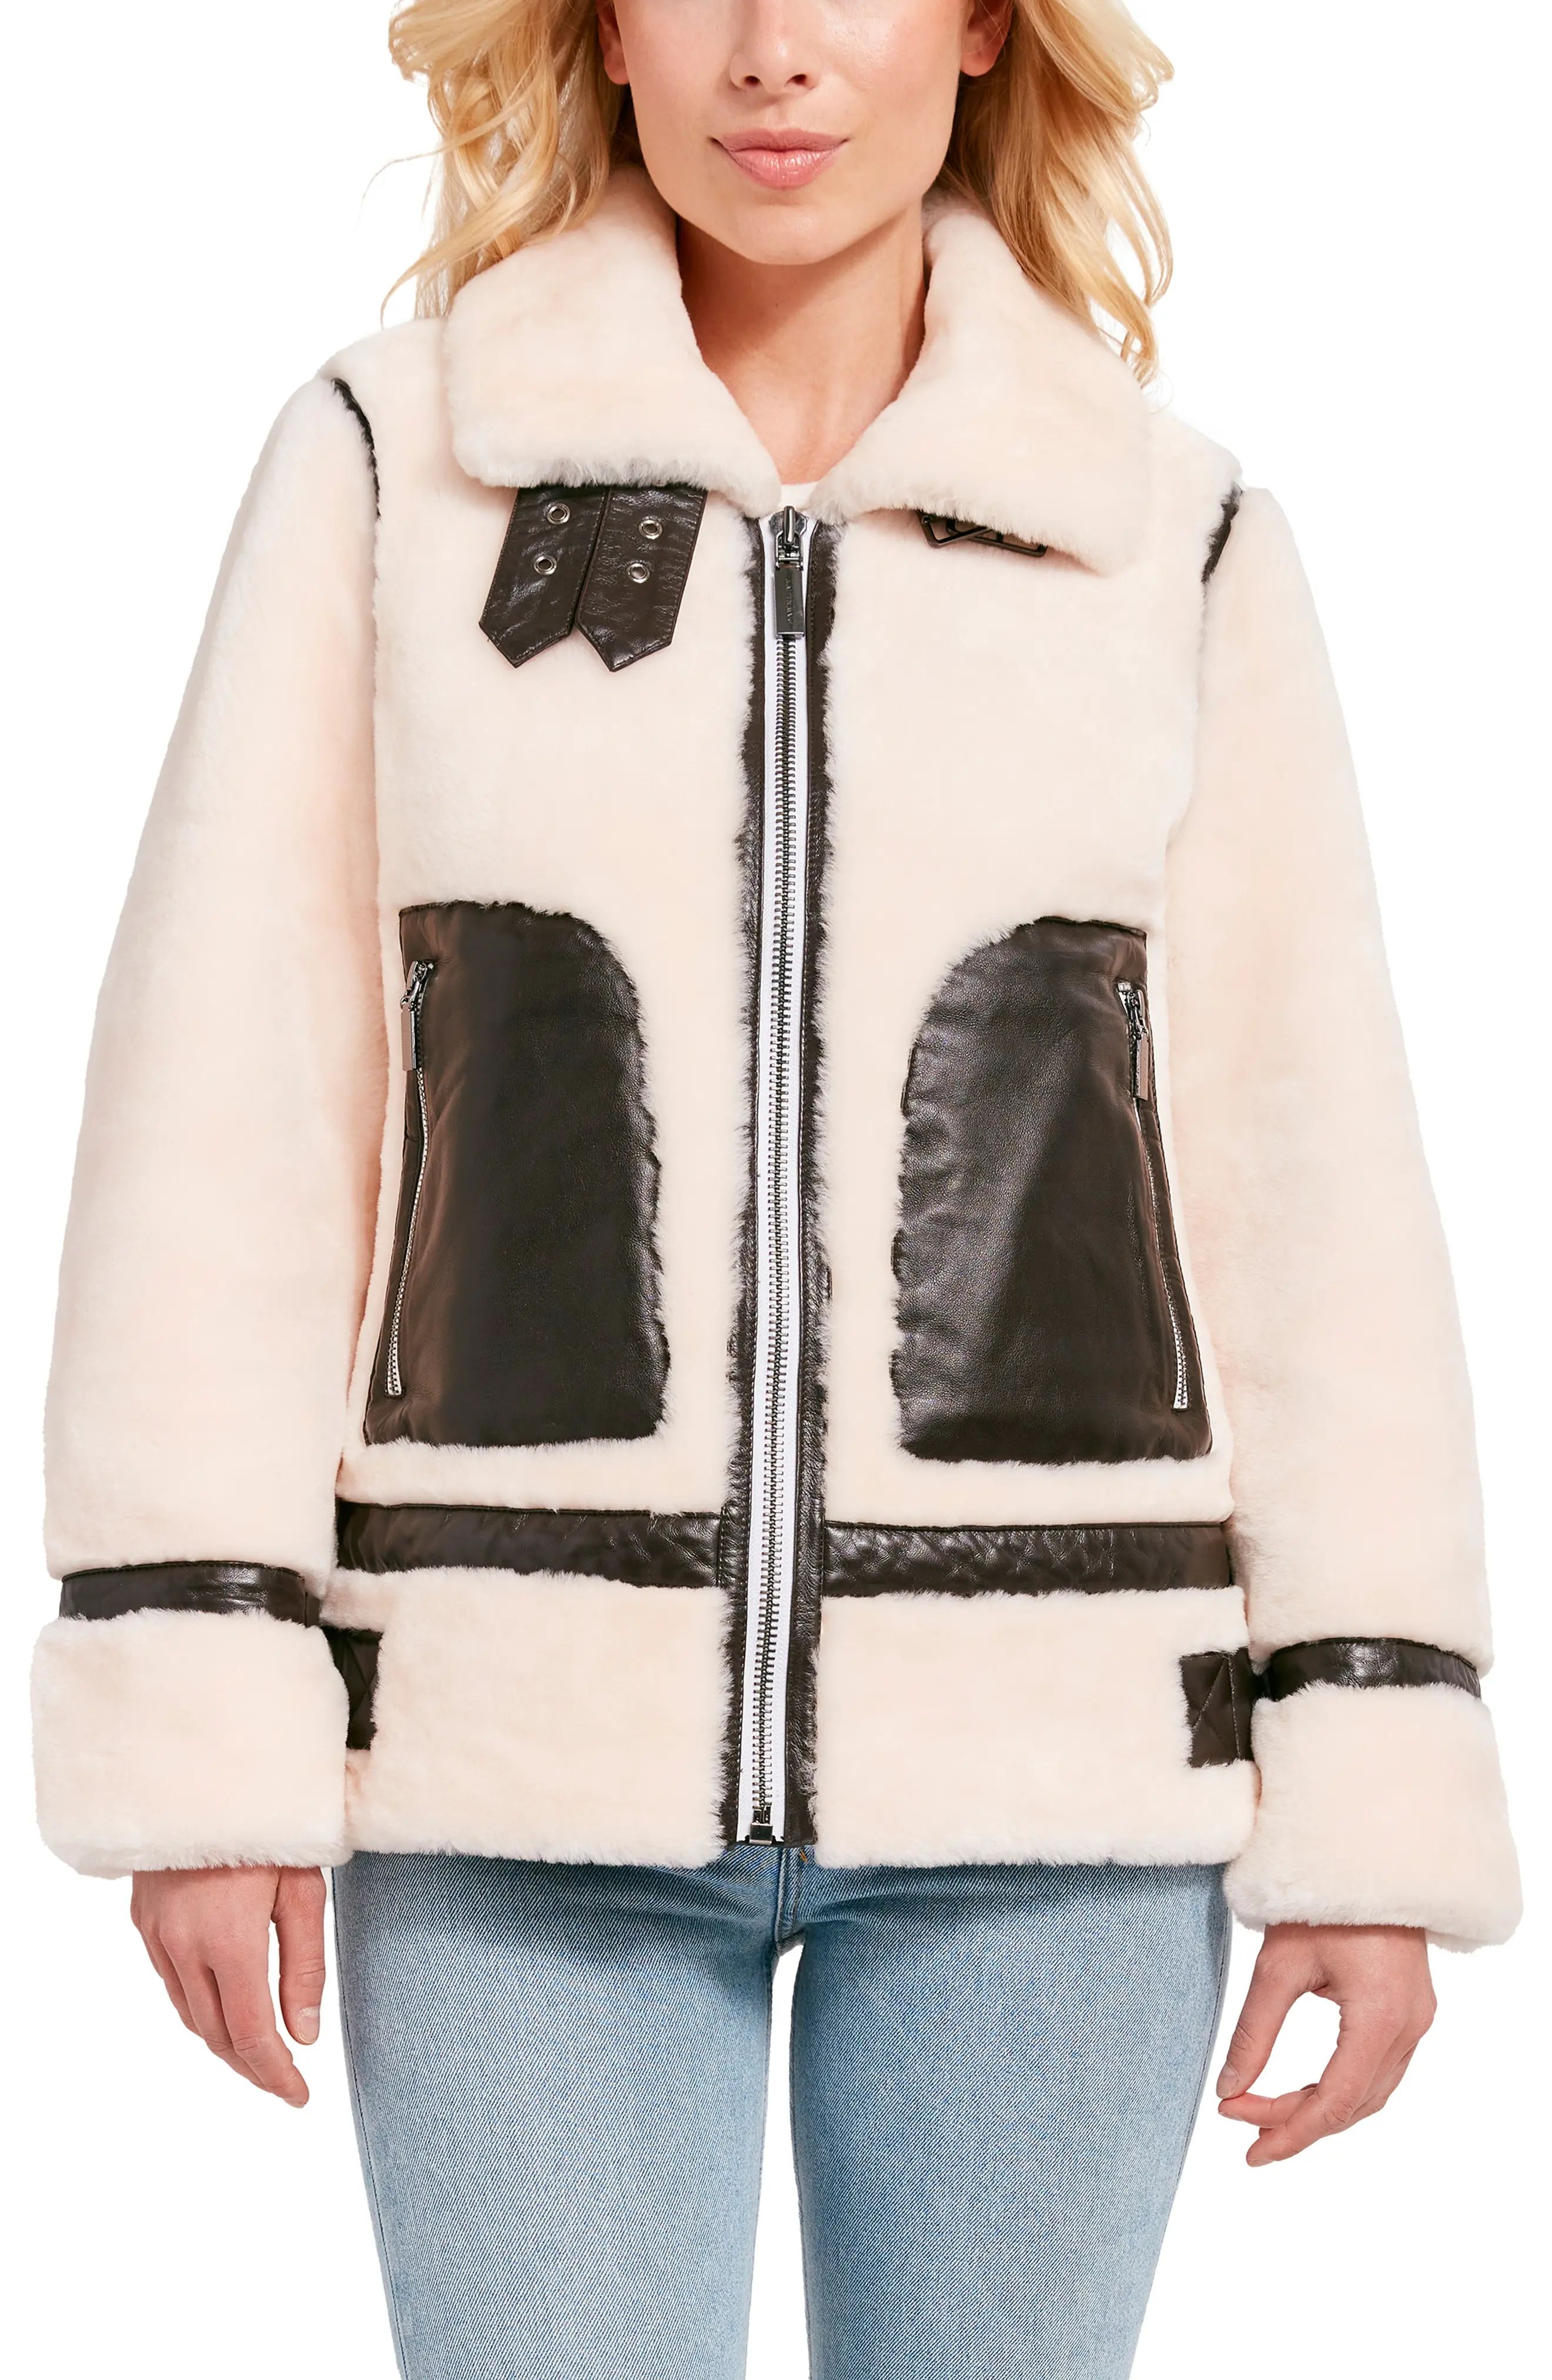 Dawn Levy Sally Genuine Shearling & Leather Jacket, Size Small in Cream at Nordstrom | Nordstrom